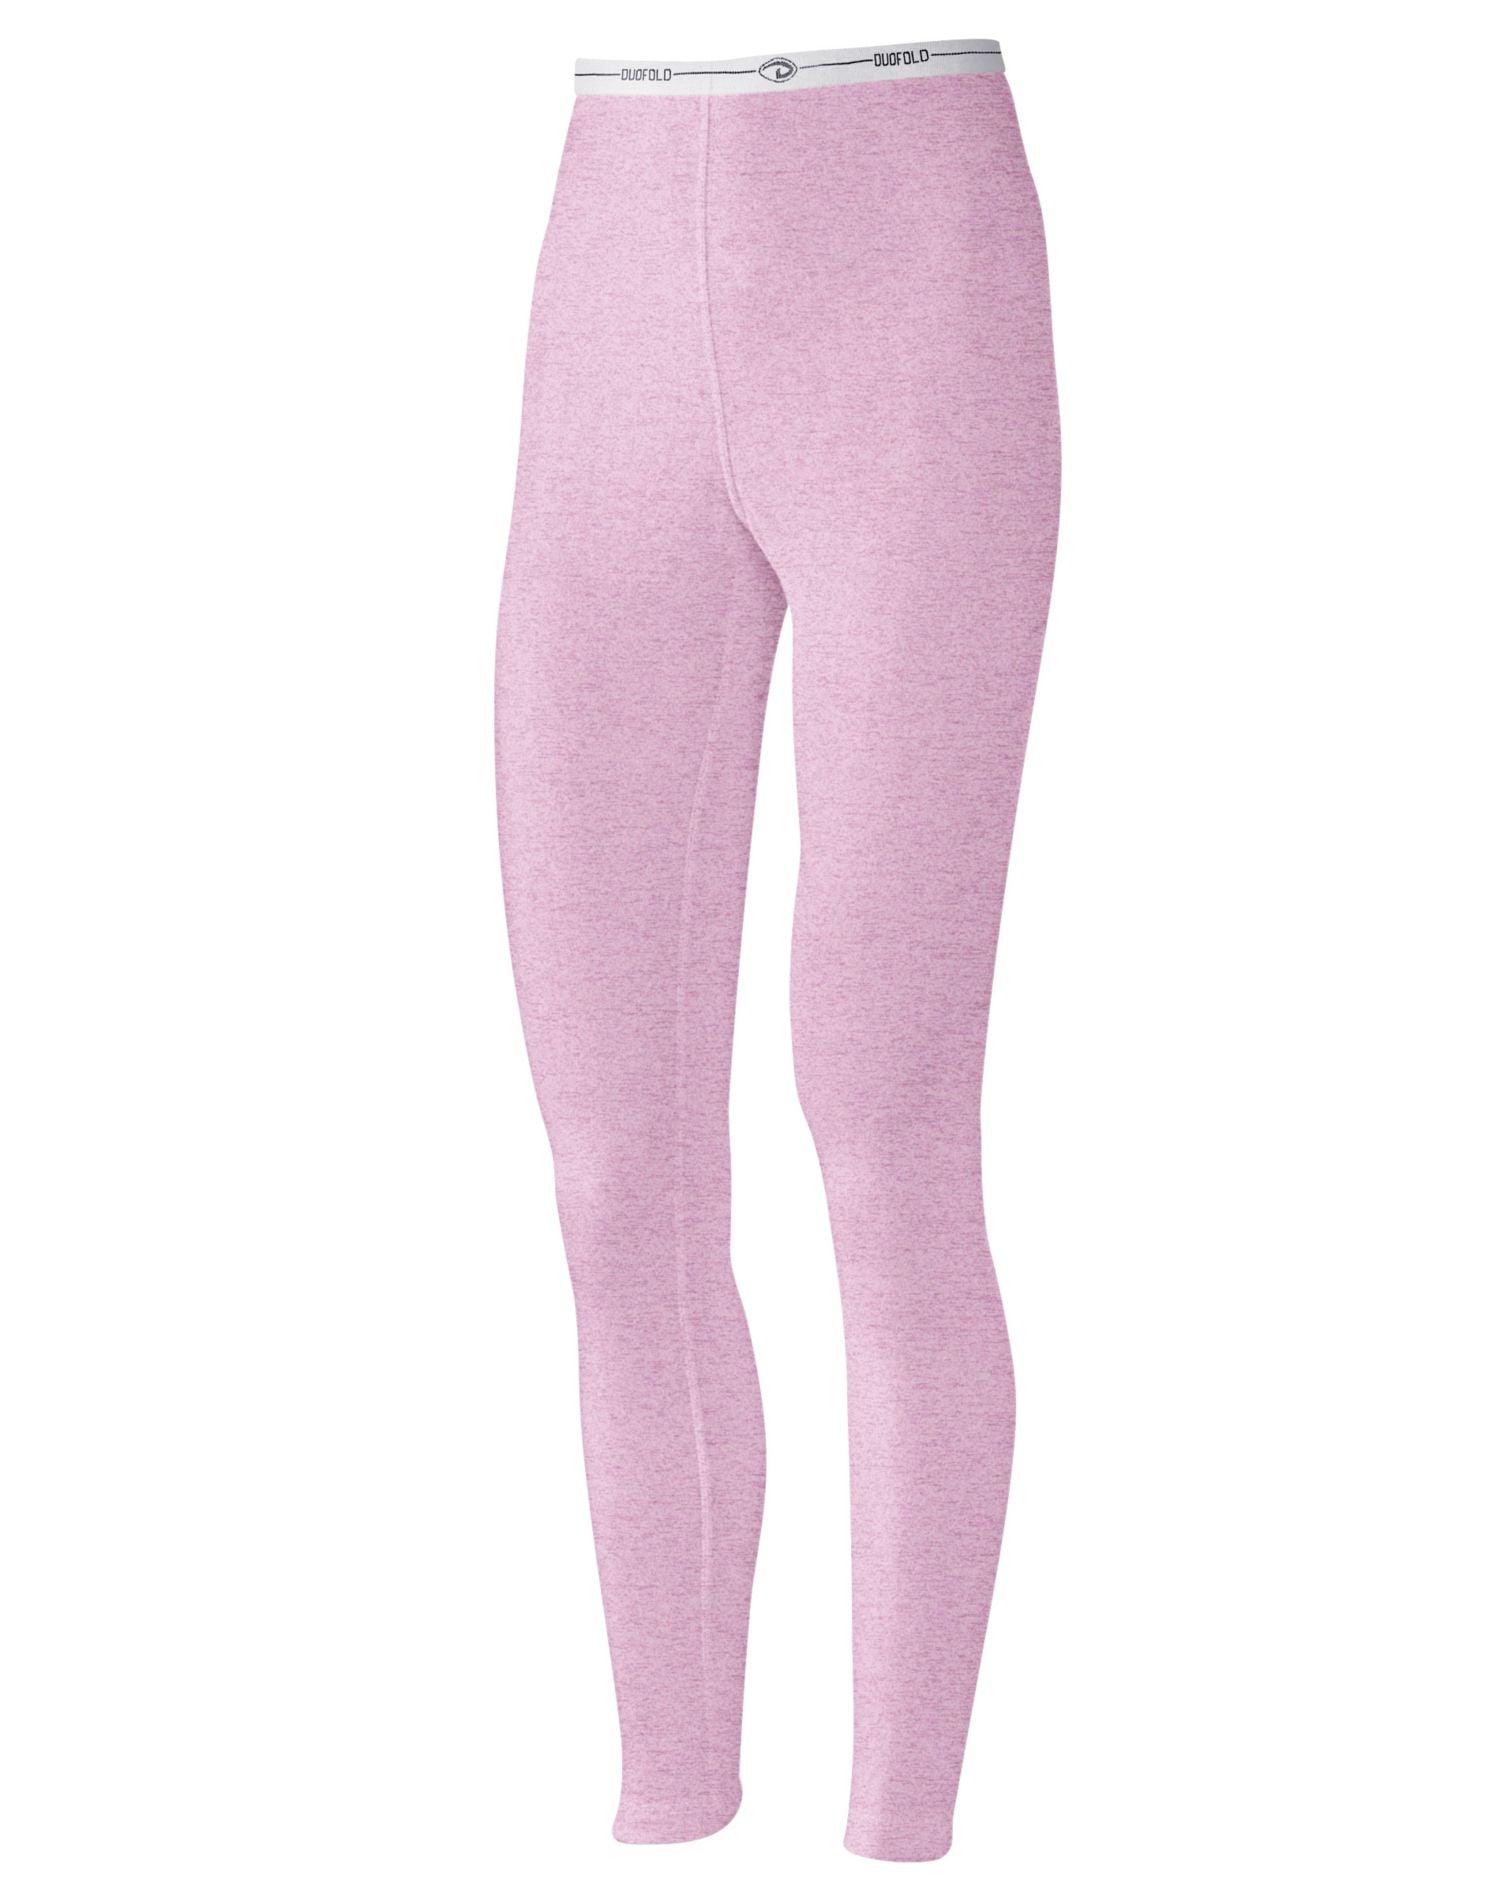 KWM2 - Duofold Originals Ankle-Length Women's Thermal-Underwear Bottoms